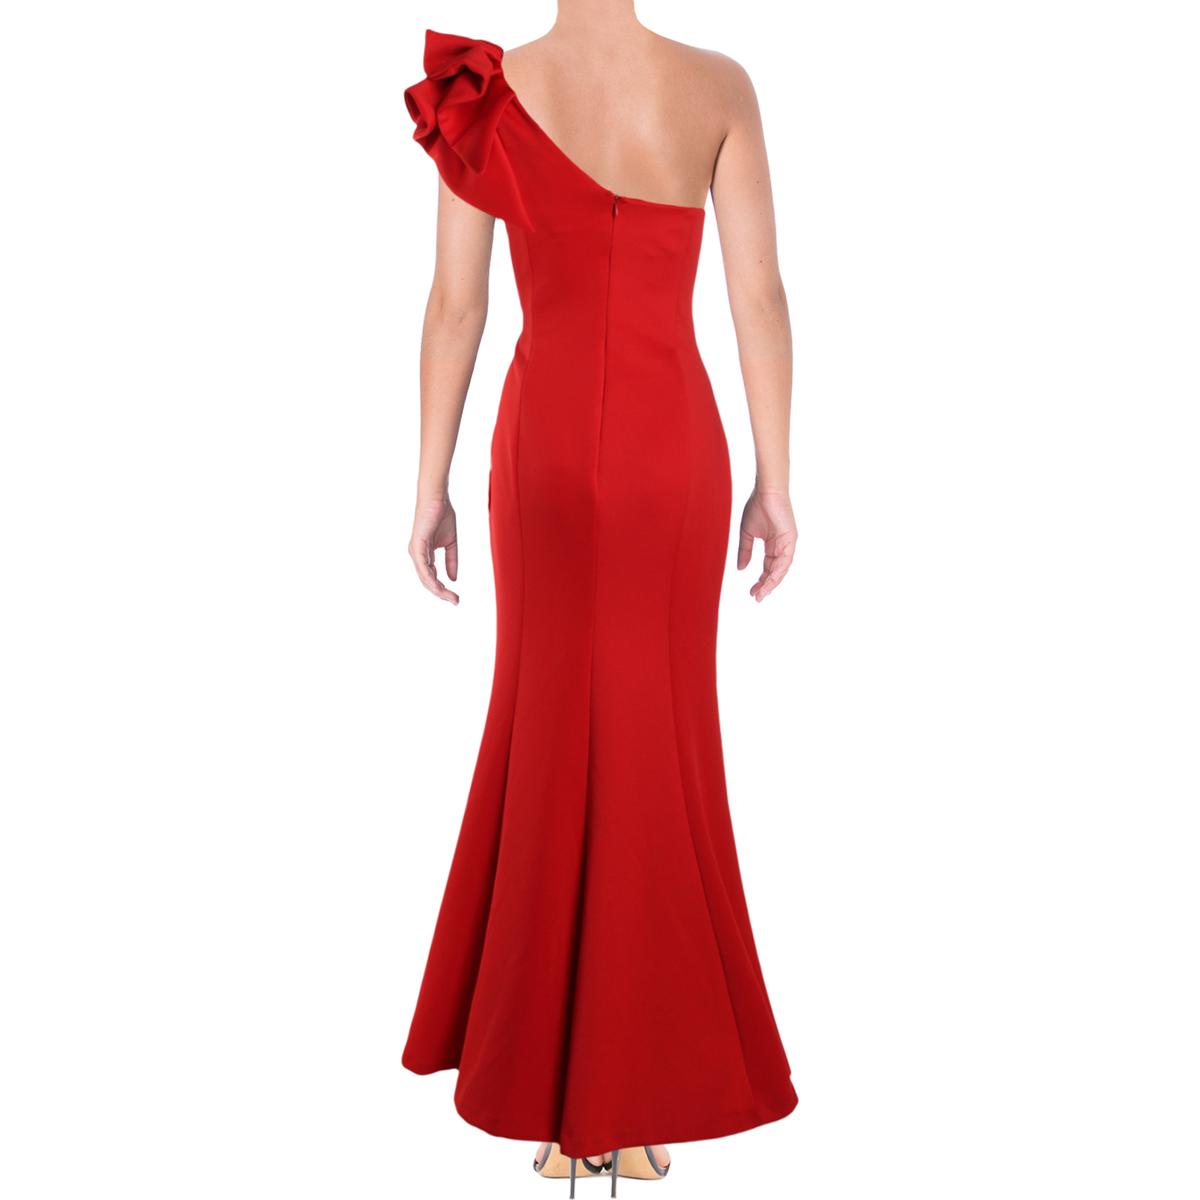 Betsy & Adam Womens Red Ruffled One Shoulder Evening Dress Gown 8 BHFO